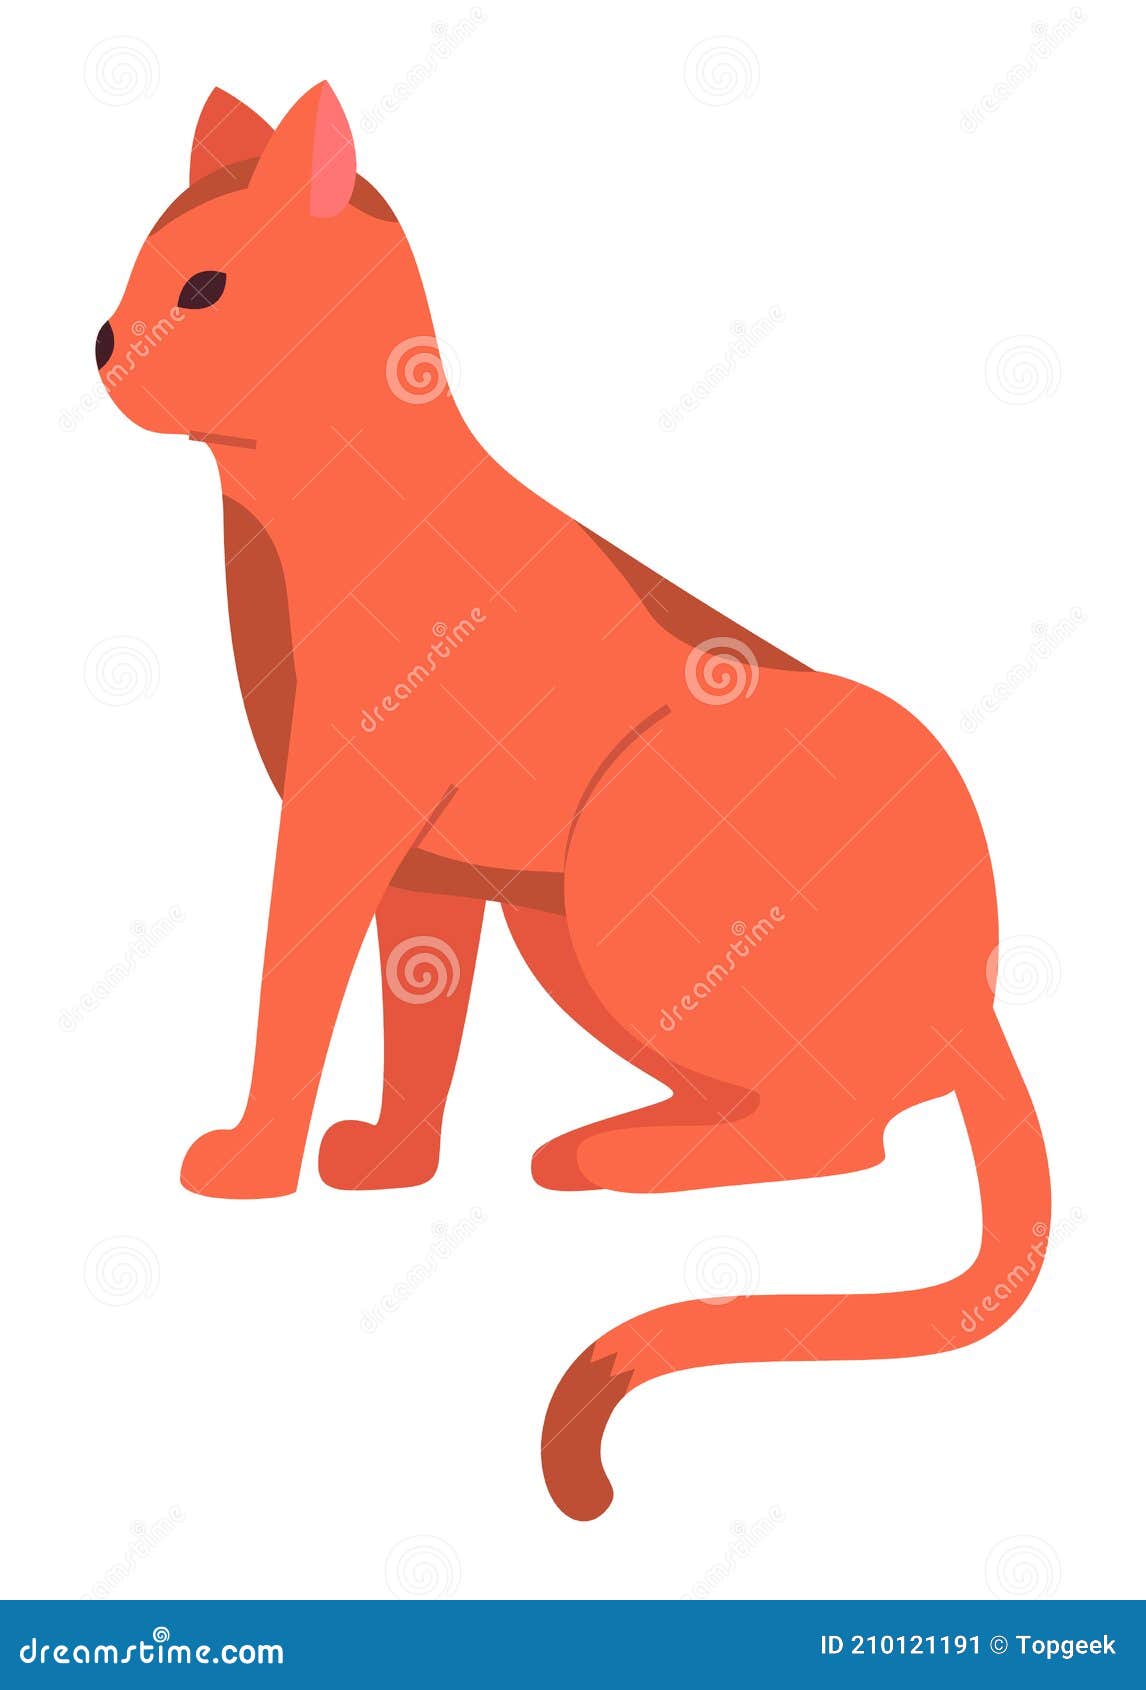 Cute Cartoon Kitty with Red Colored Fur Sitting Side View Vector  Illustration on White Background Stock Vector - Illustration of predator,  character: 210121191